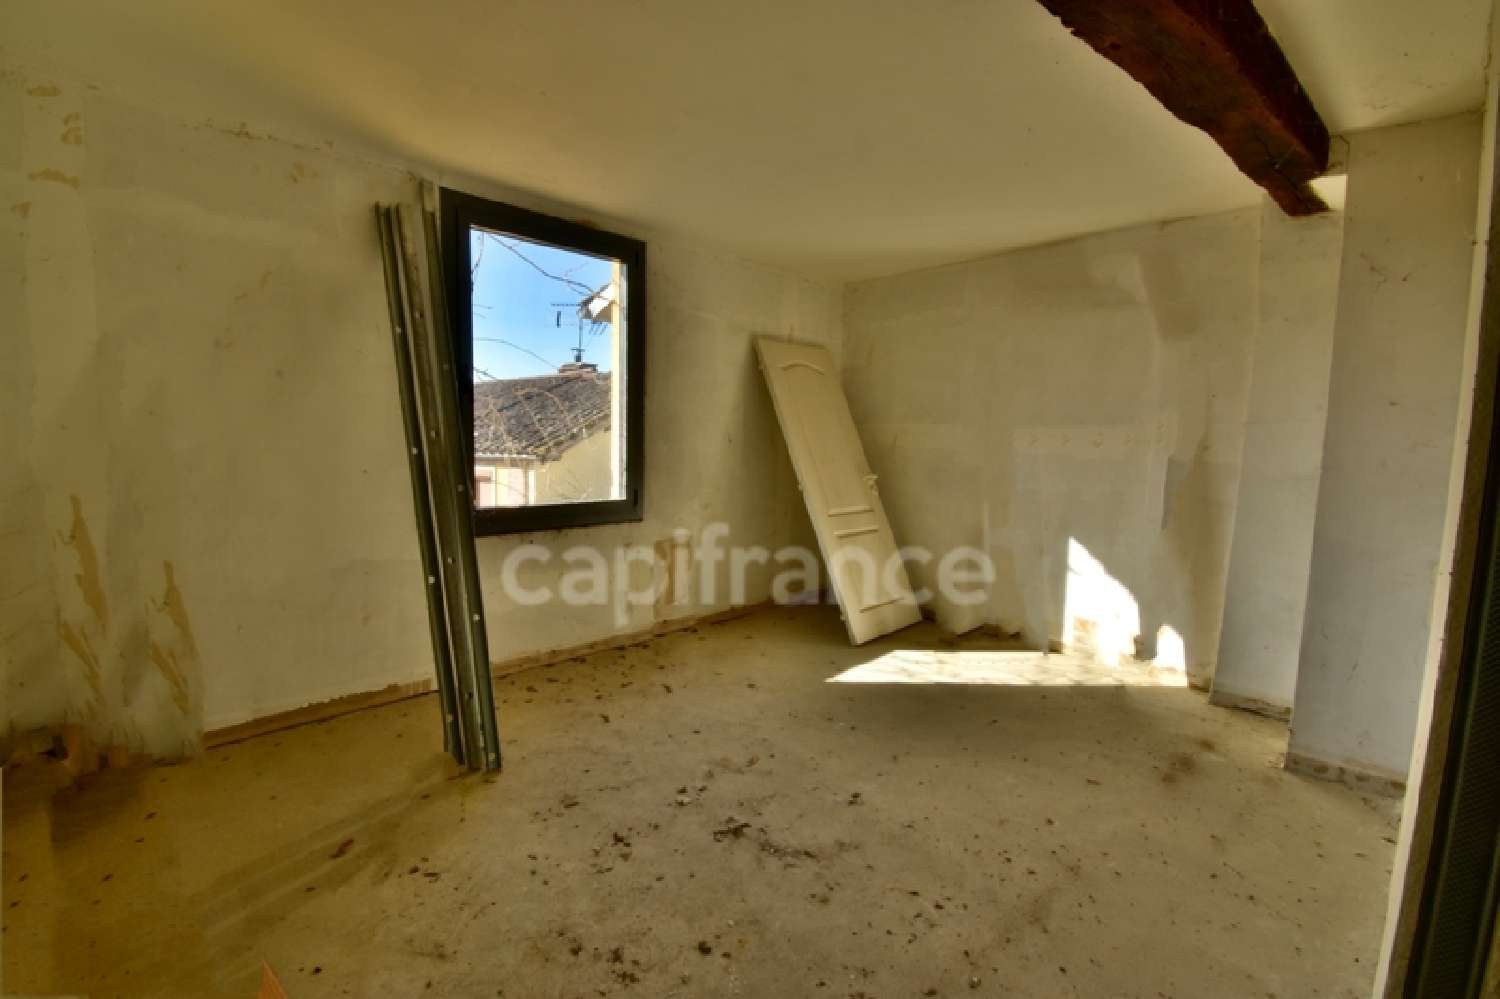  for sale village house Panjas Gers 6